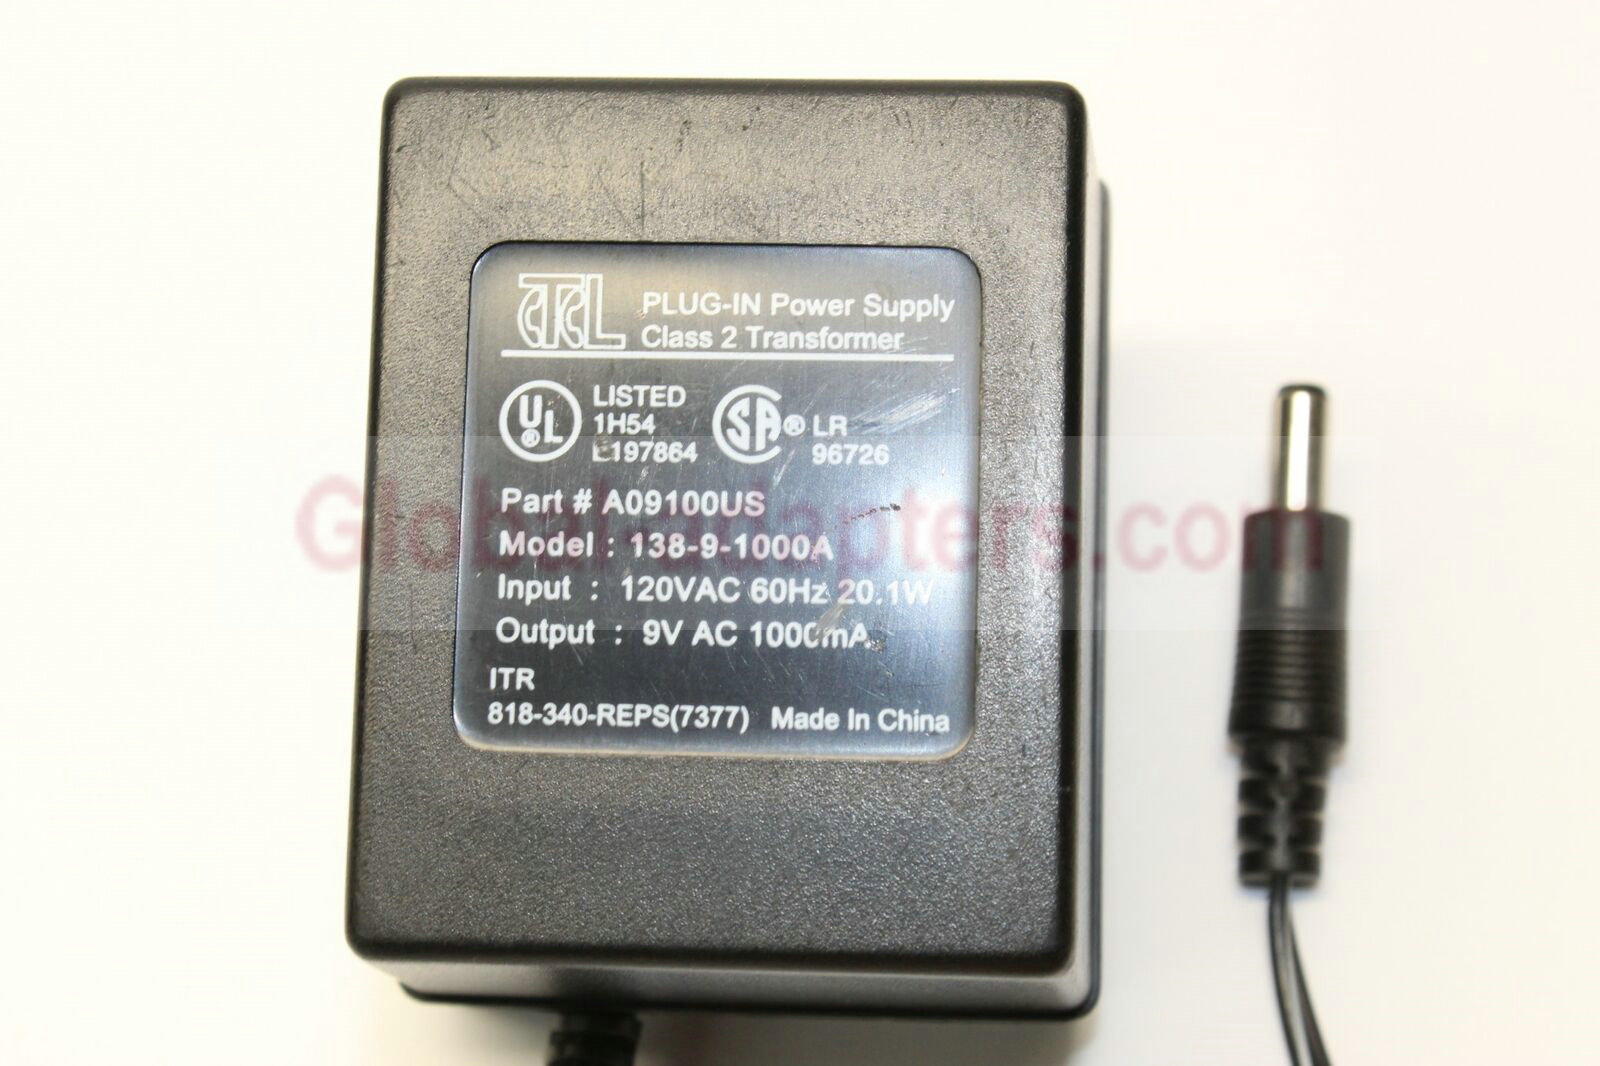 New 9V 1A CTRL 138-9-1000A A09100US Plug-In Class 2 Transformer Power Supply Ac Adapter